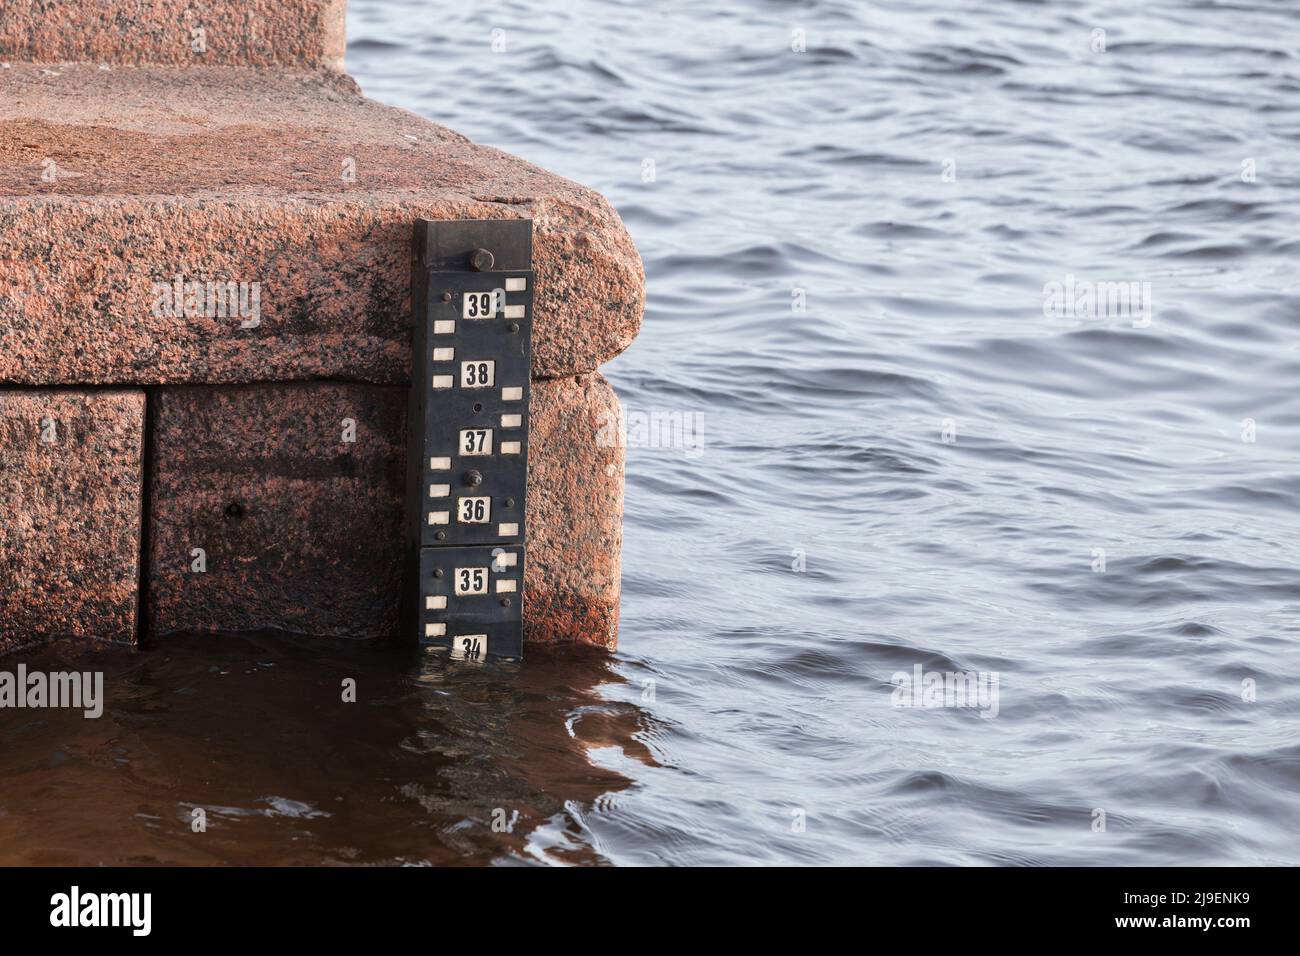 Tide gauge scale mounted on the Neva river bank, Saint-Petersburg, Russia Stock Photo